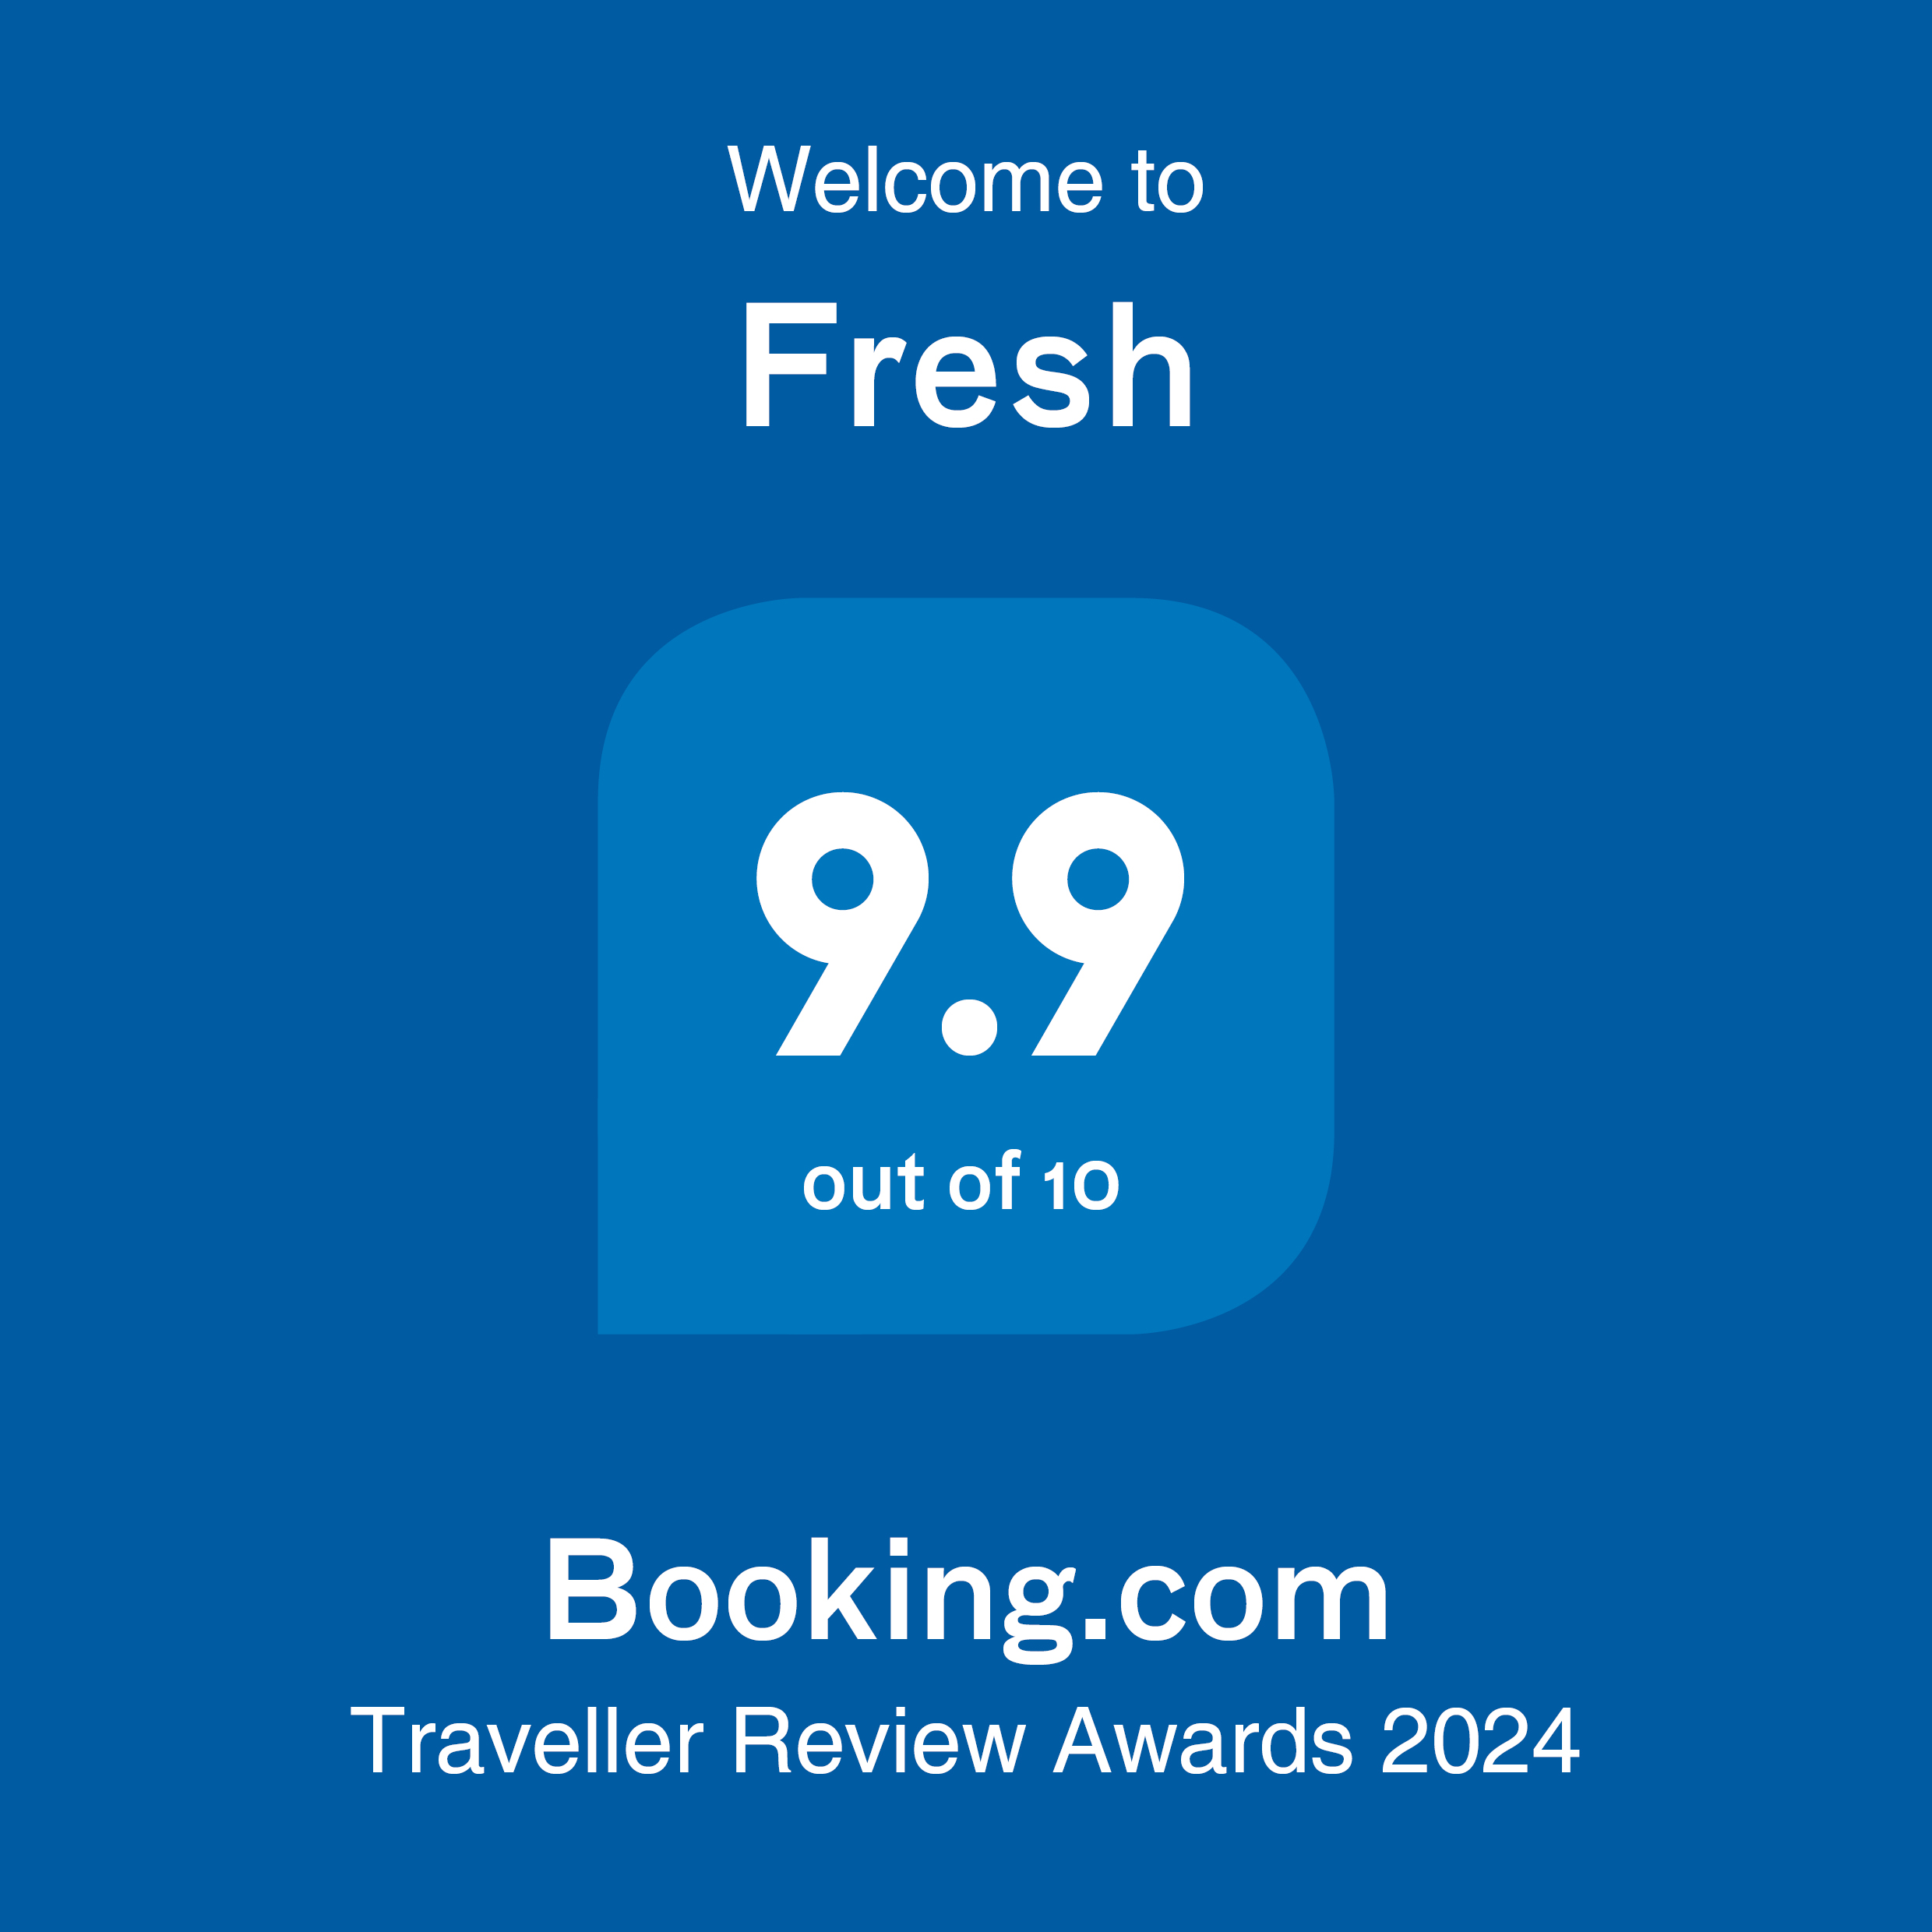 Best ranking on Booking.com